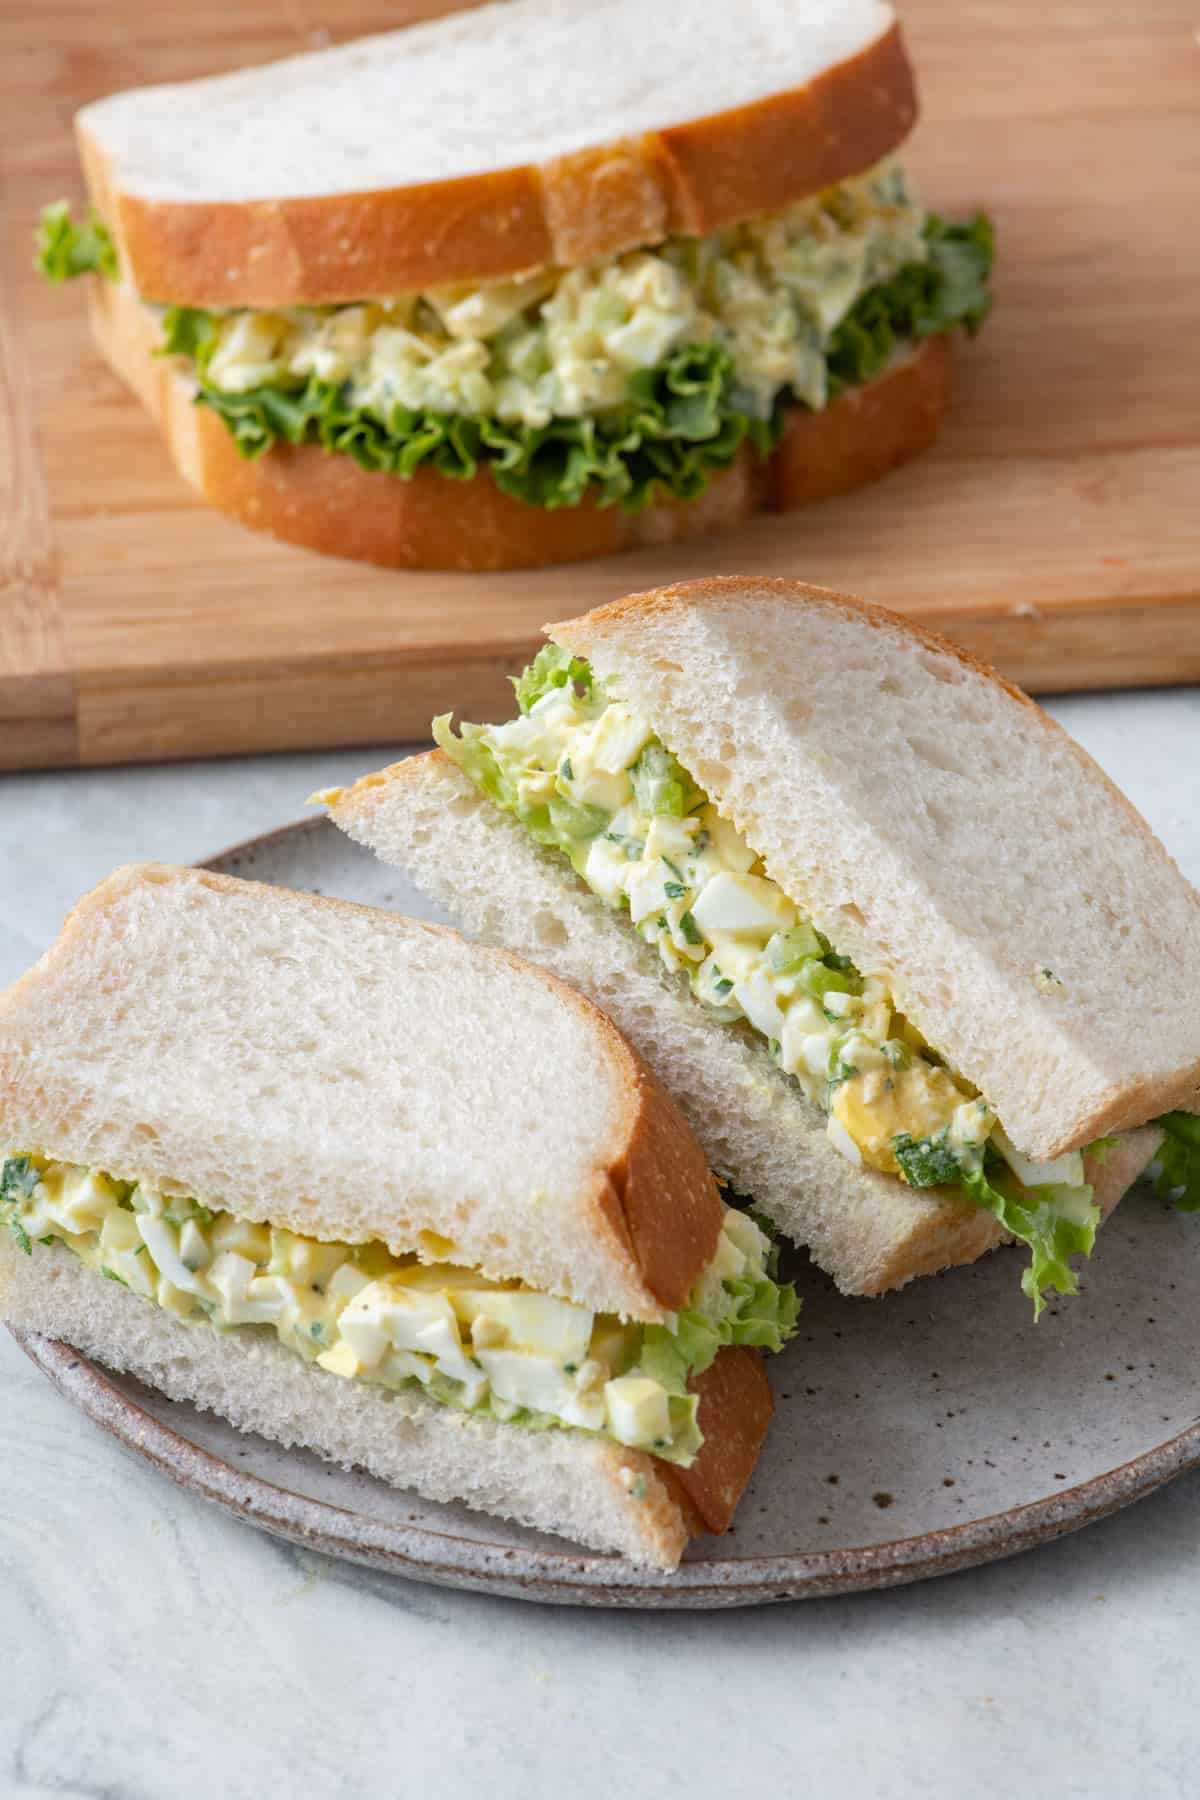 Egg salad sandwich cut in half on a plate with a whole sandwich nearby.